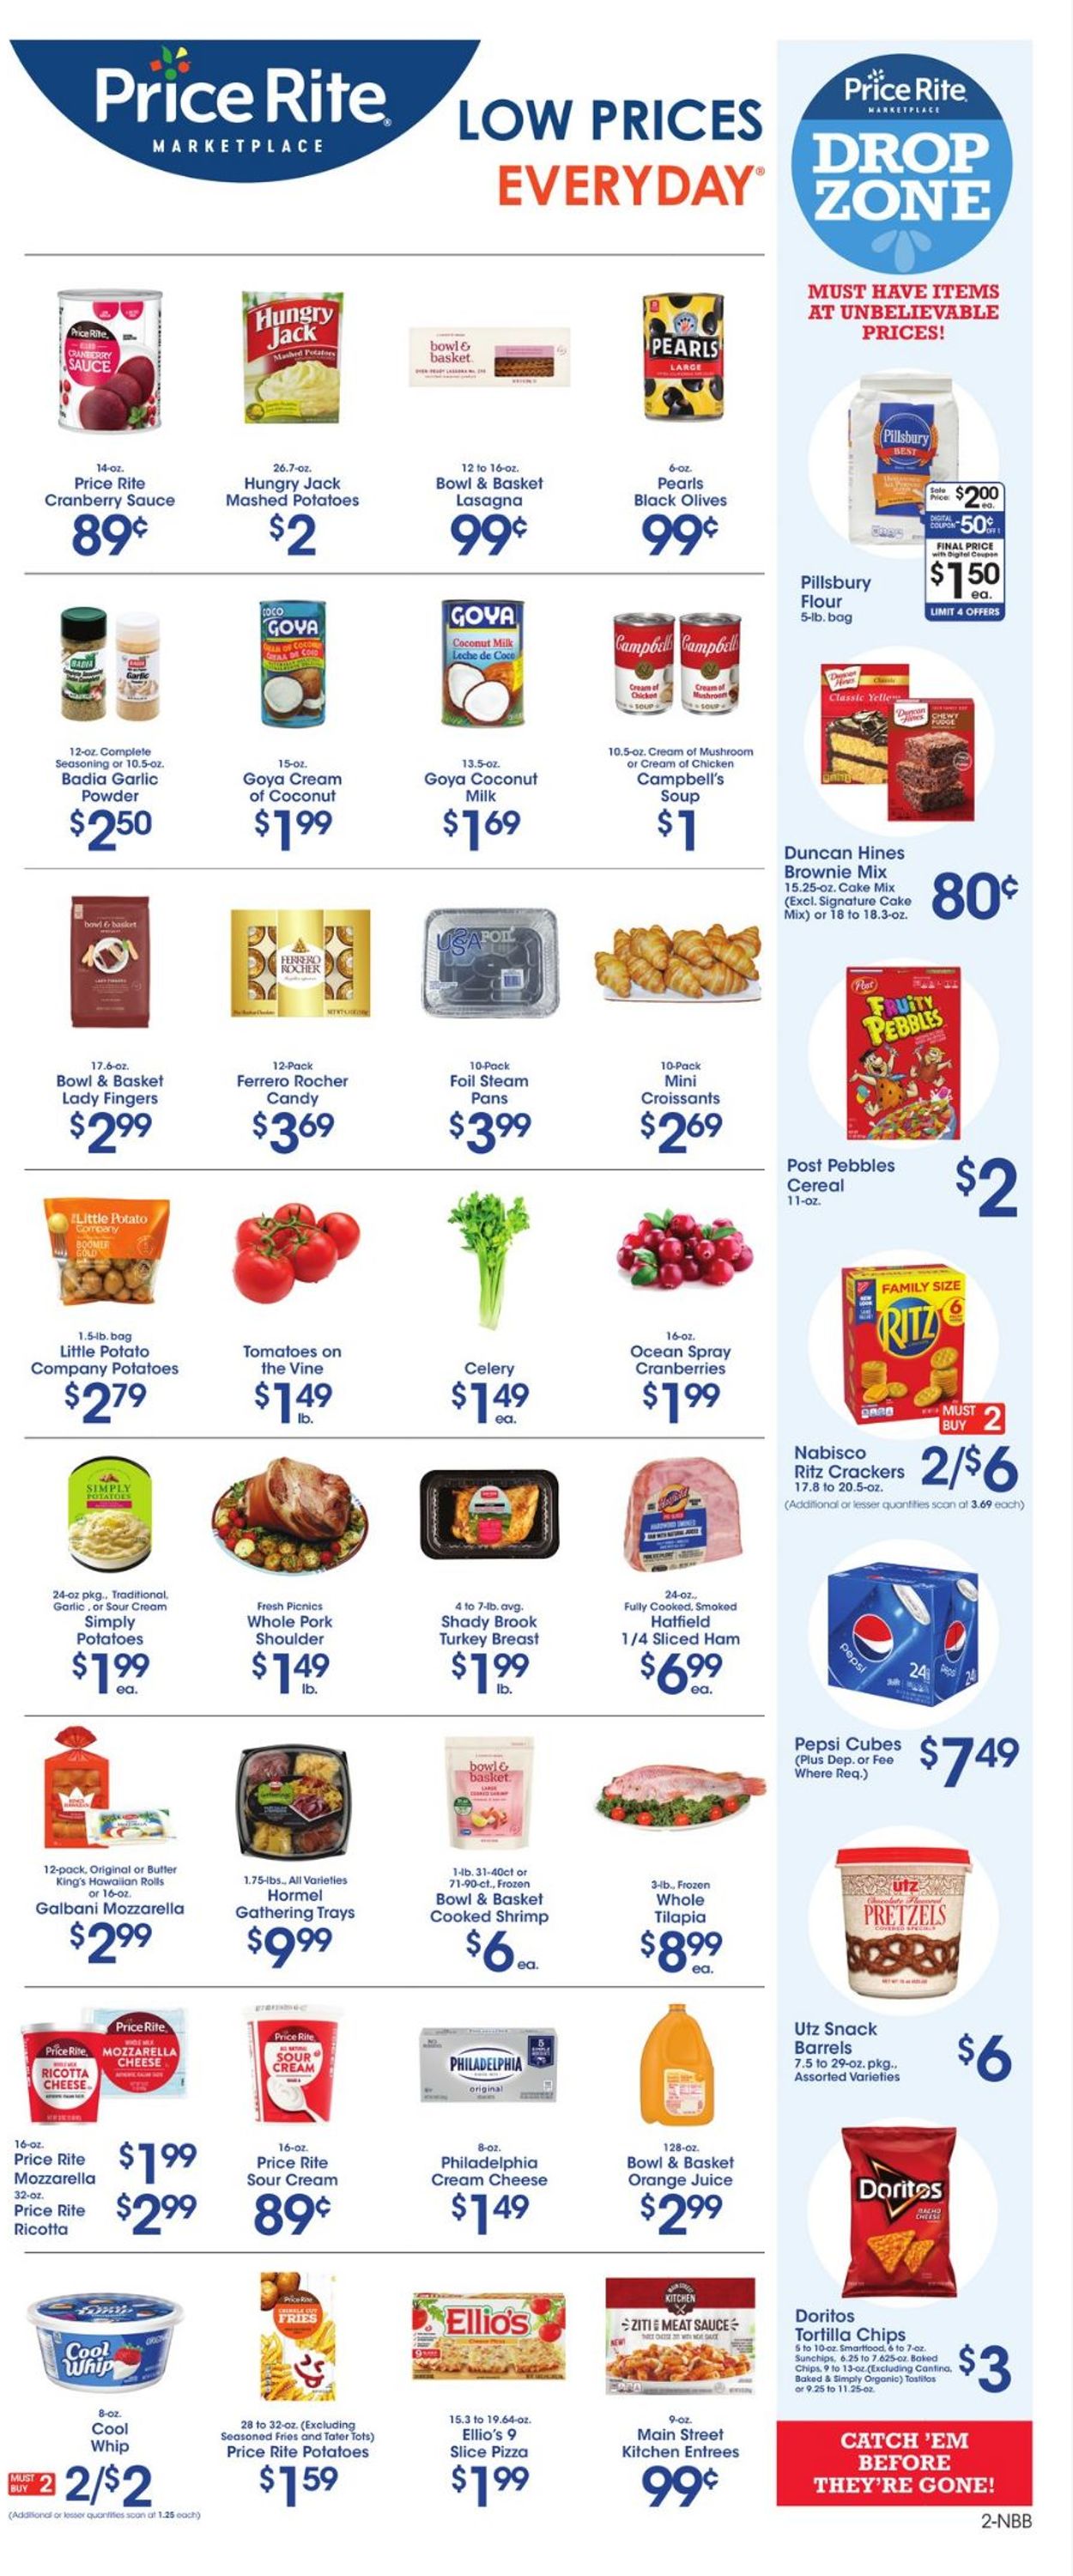 Price Rite THANKSGIVING 2021 Weekly Ad Circular - valid 11/19-11/25/2021 (Page 2)